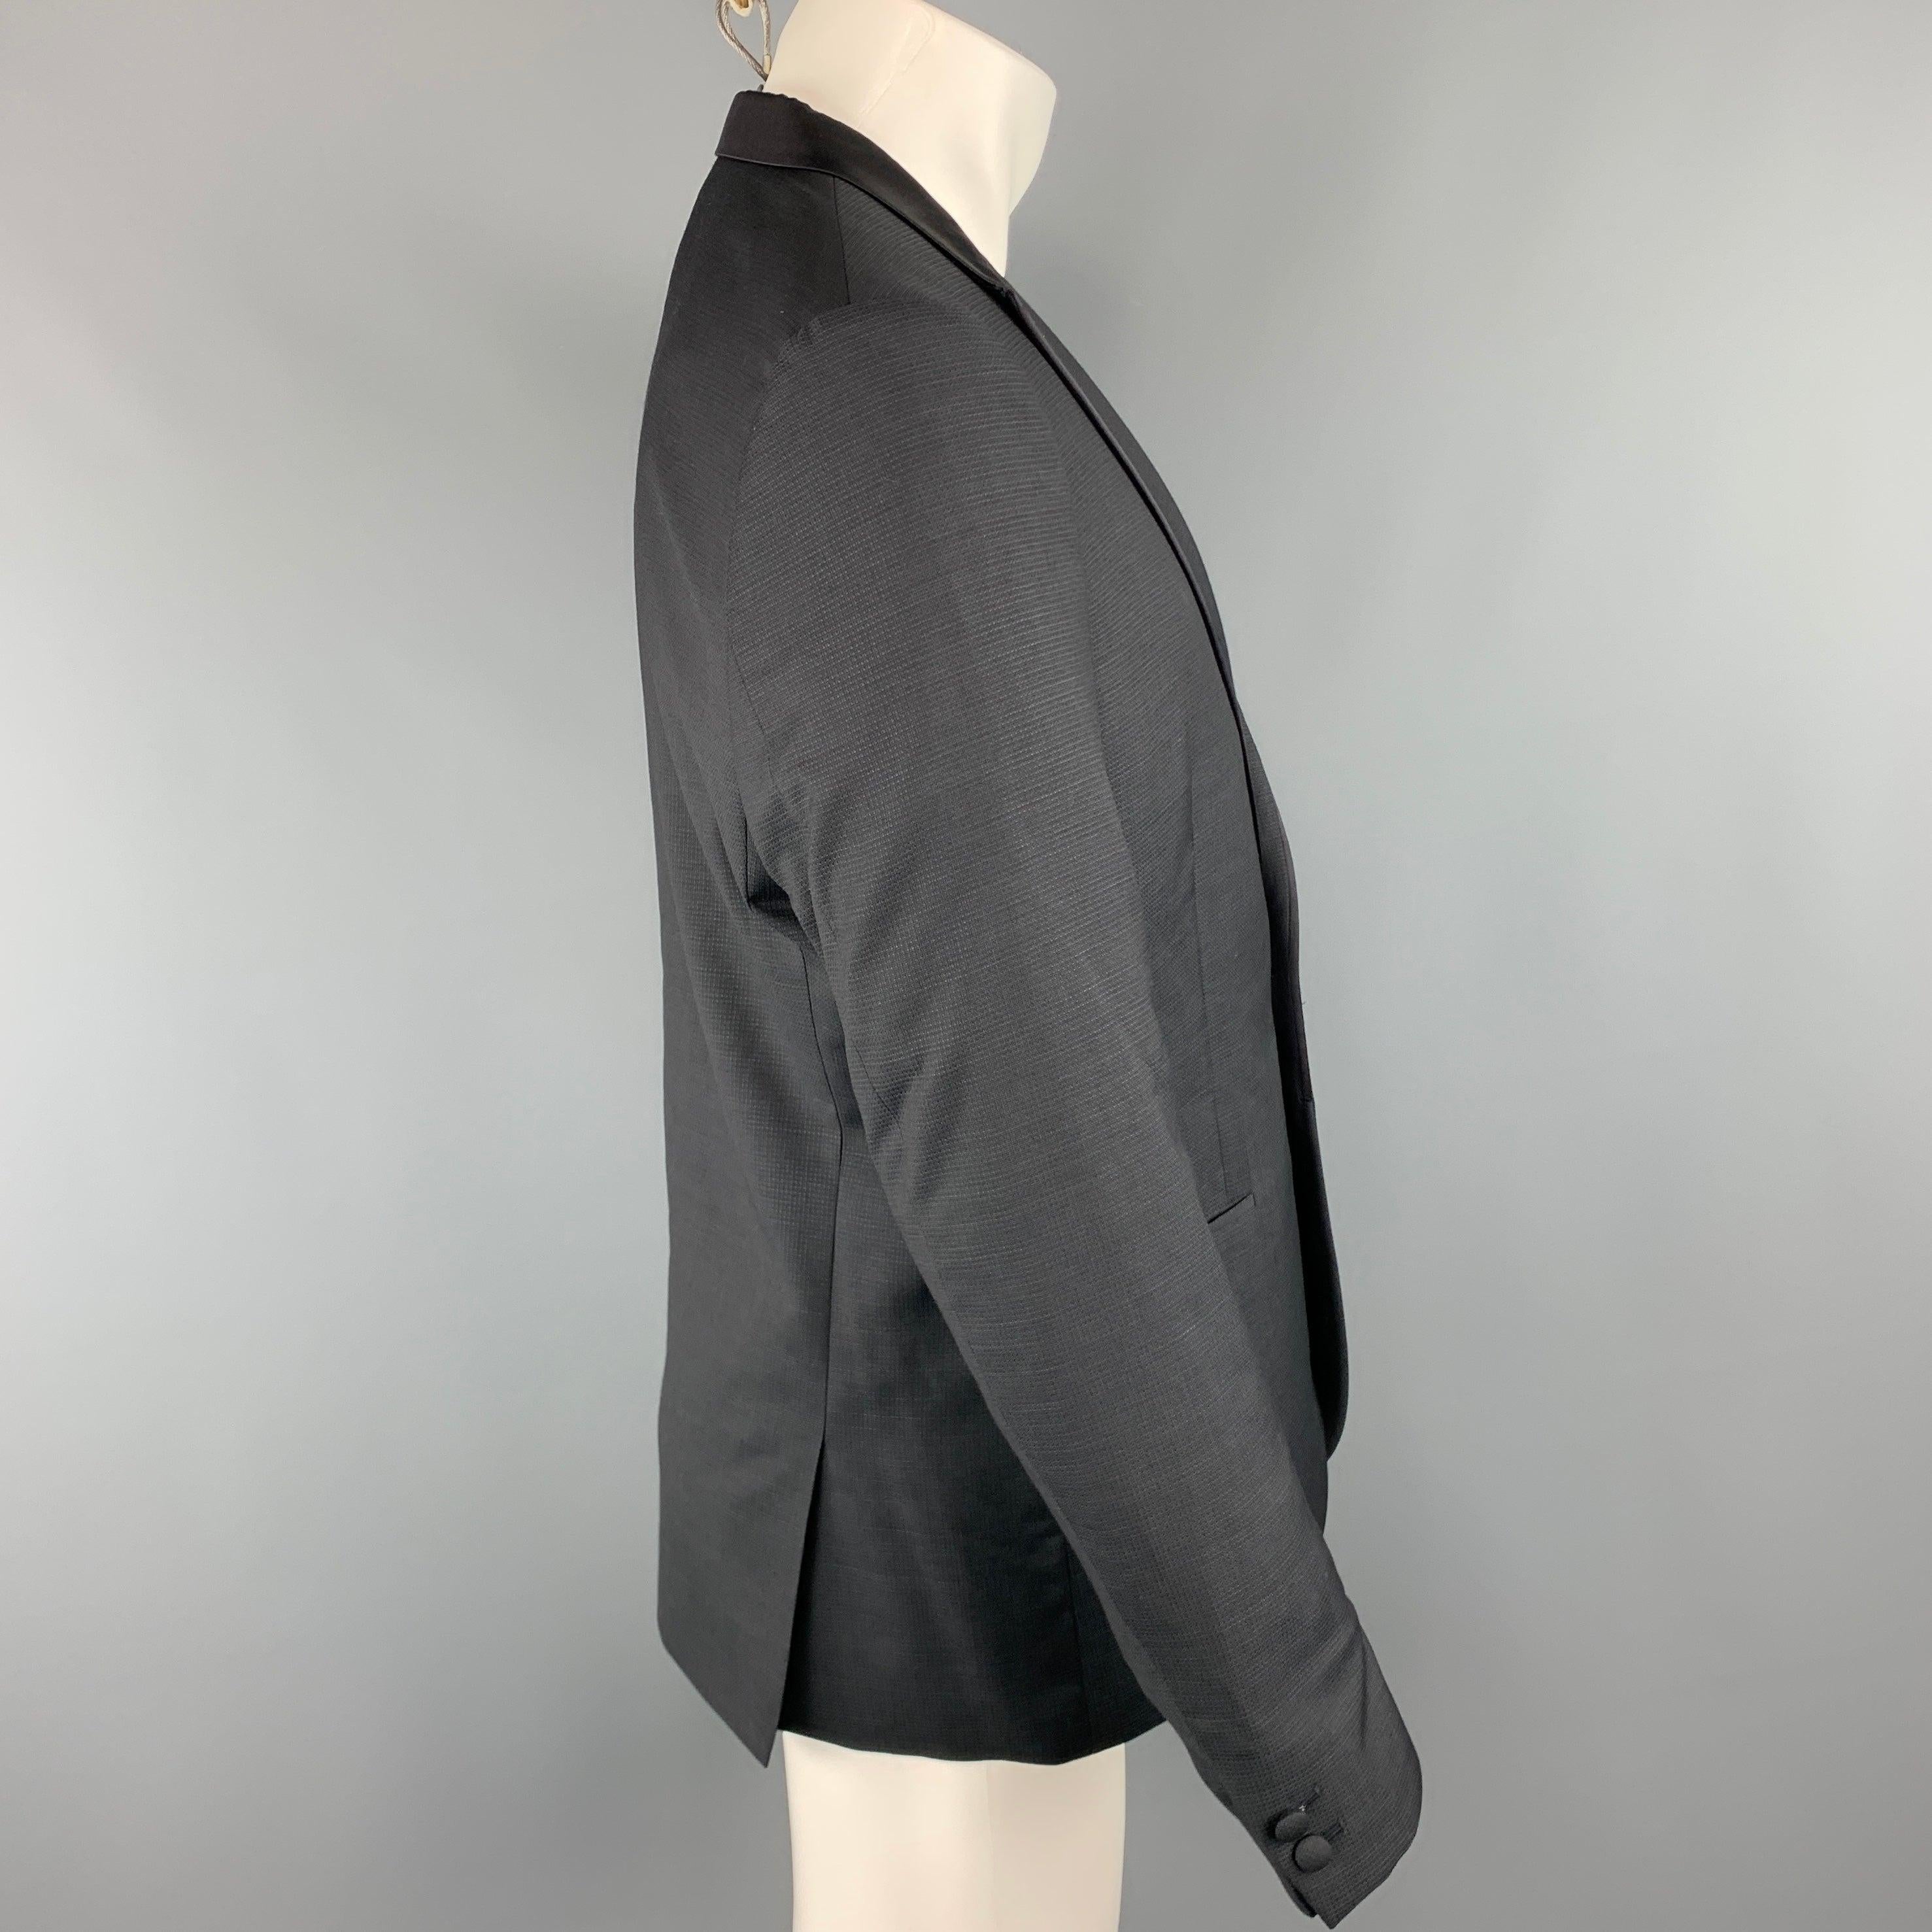 THE KOOPLES Chest Size 42 Nailhead Black Wool Peak Lapel Sport Coat In Excellent Condition For Sale In San Francisco, CA